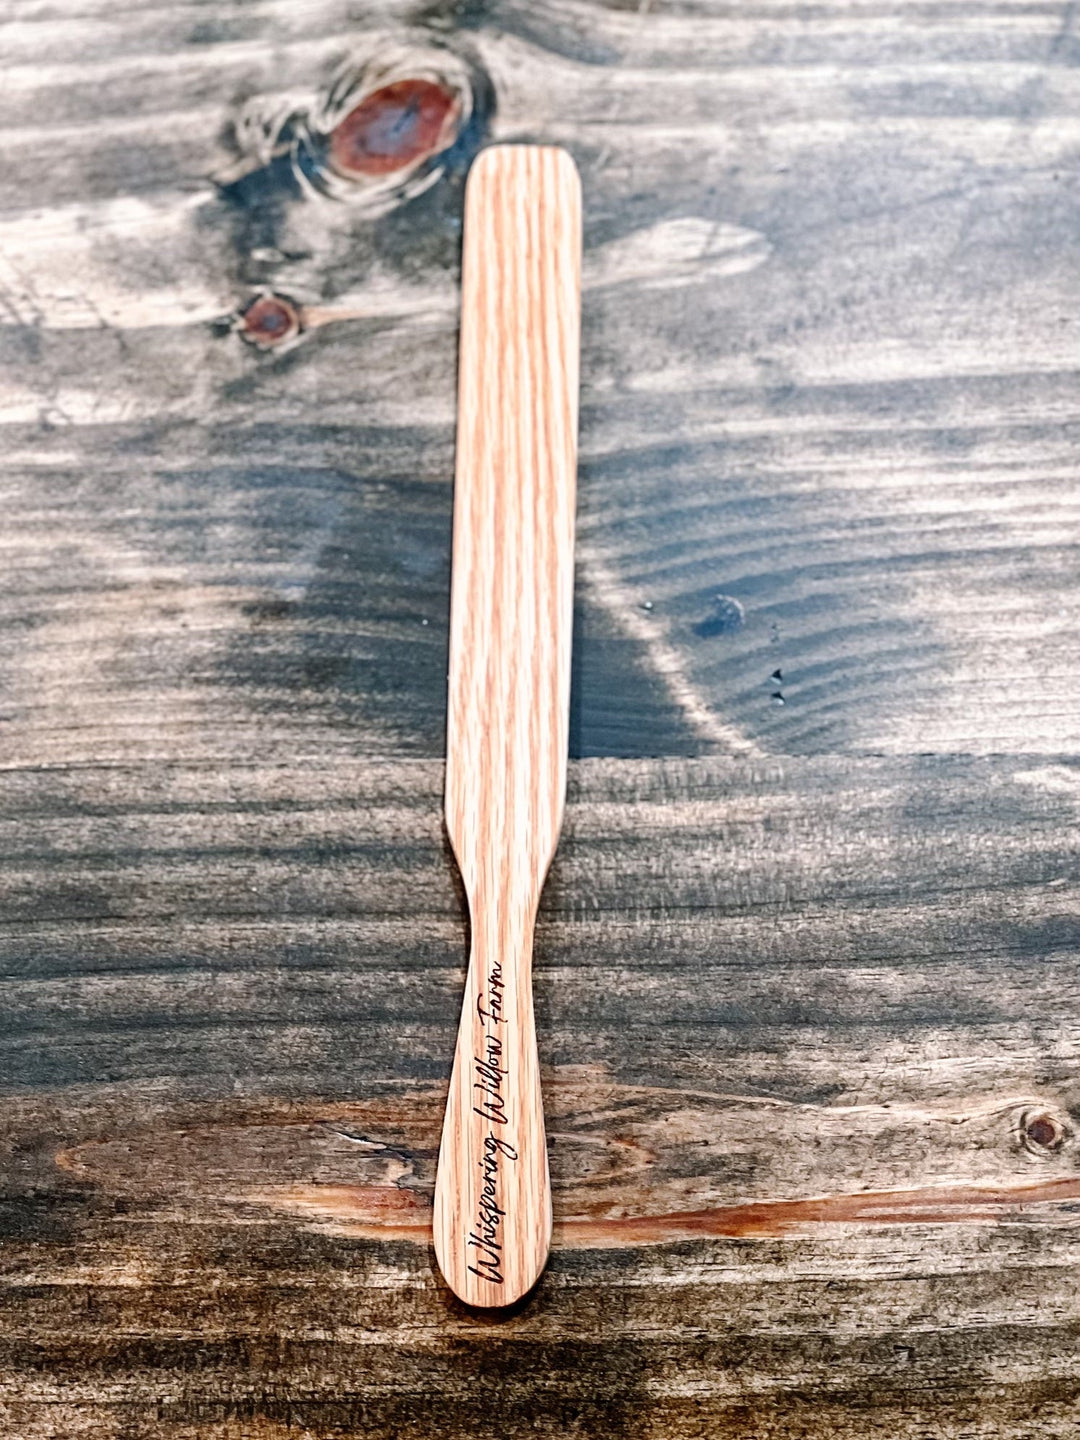 The Sourdough School - Hand Carved Wooden Spatula